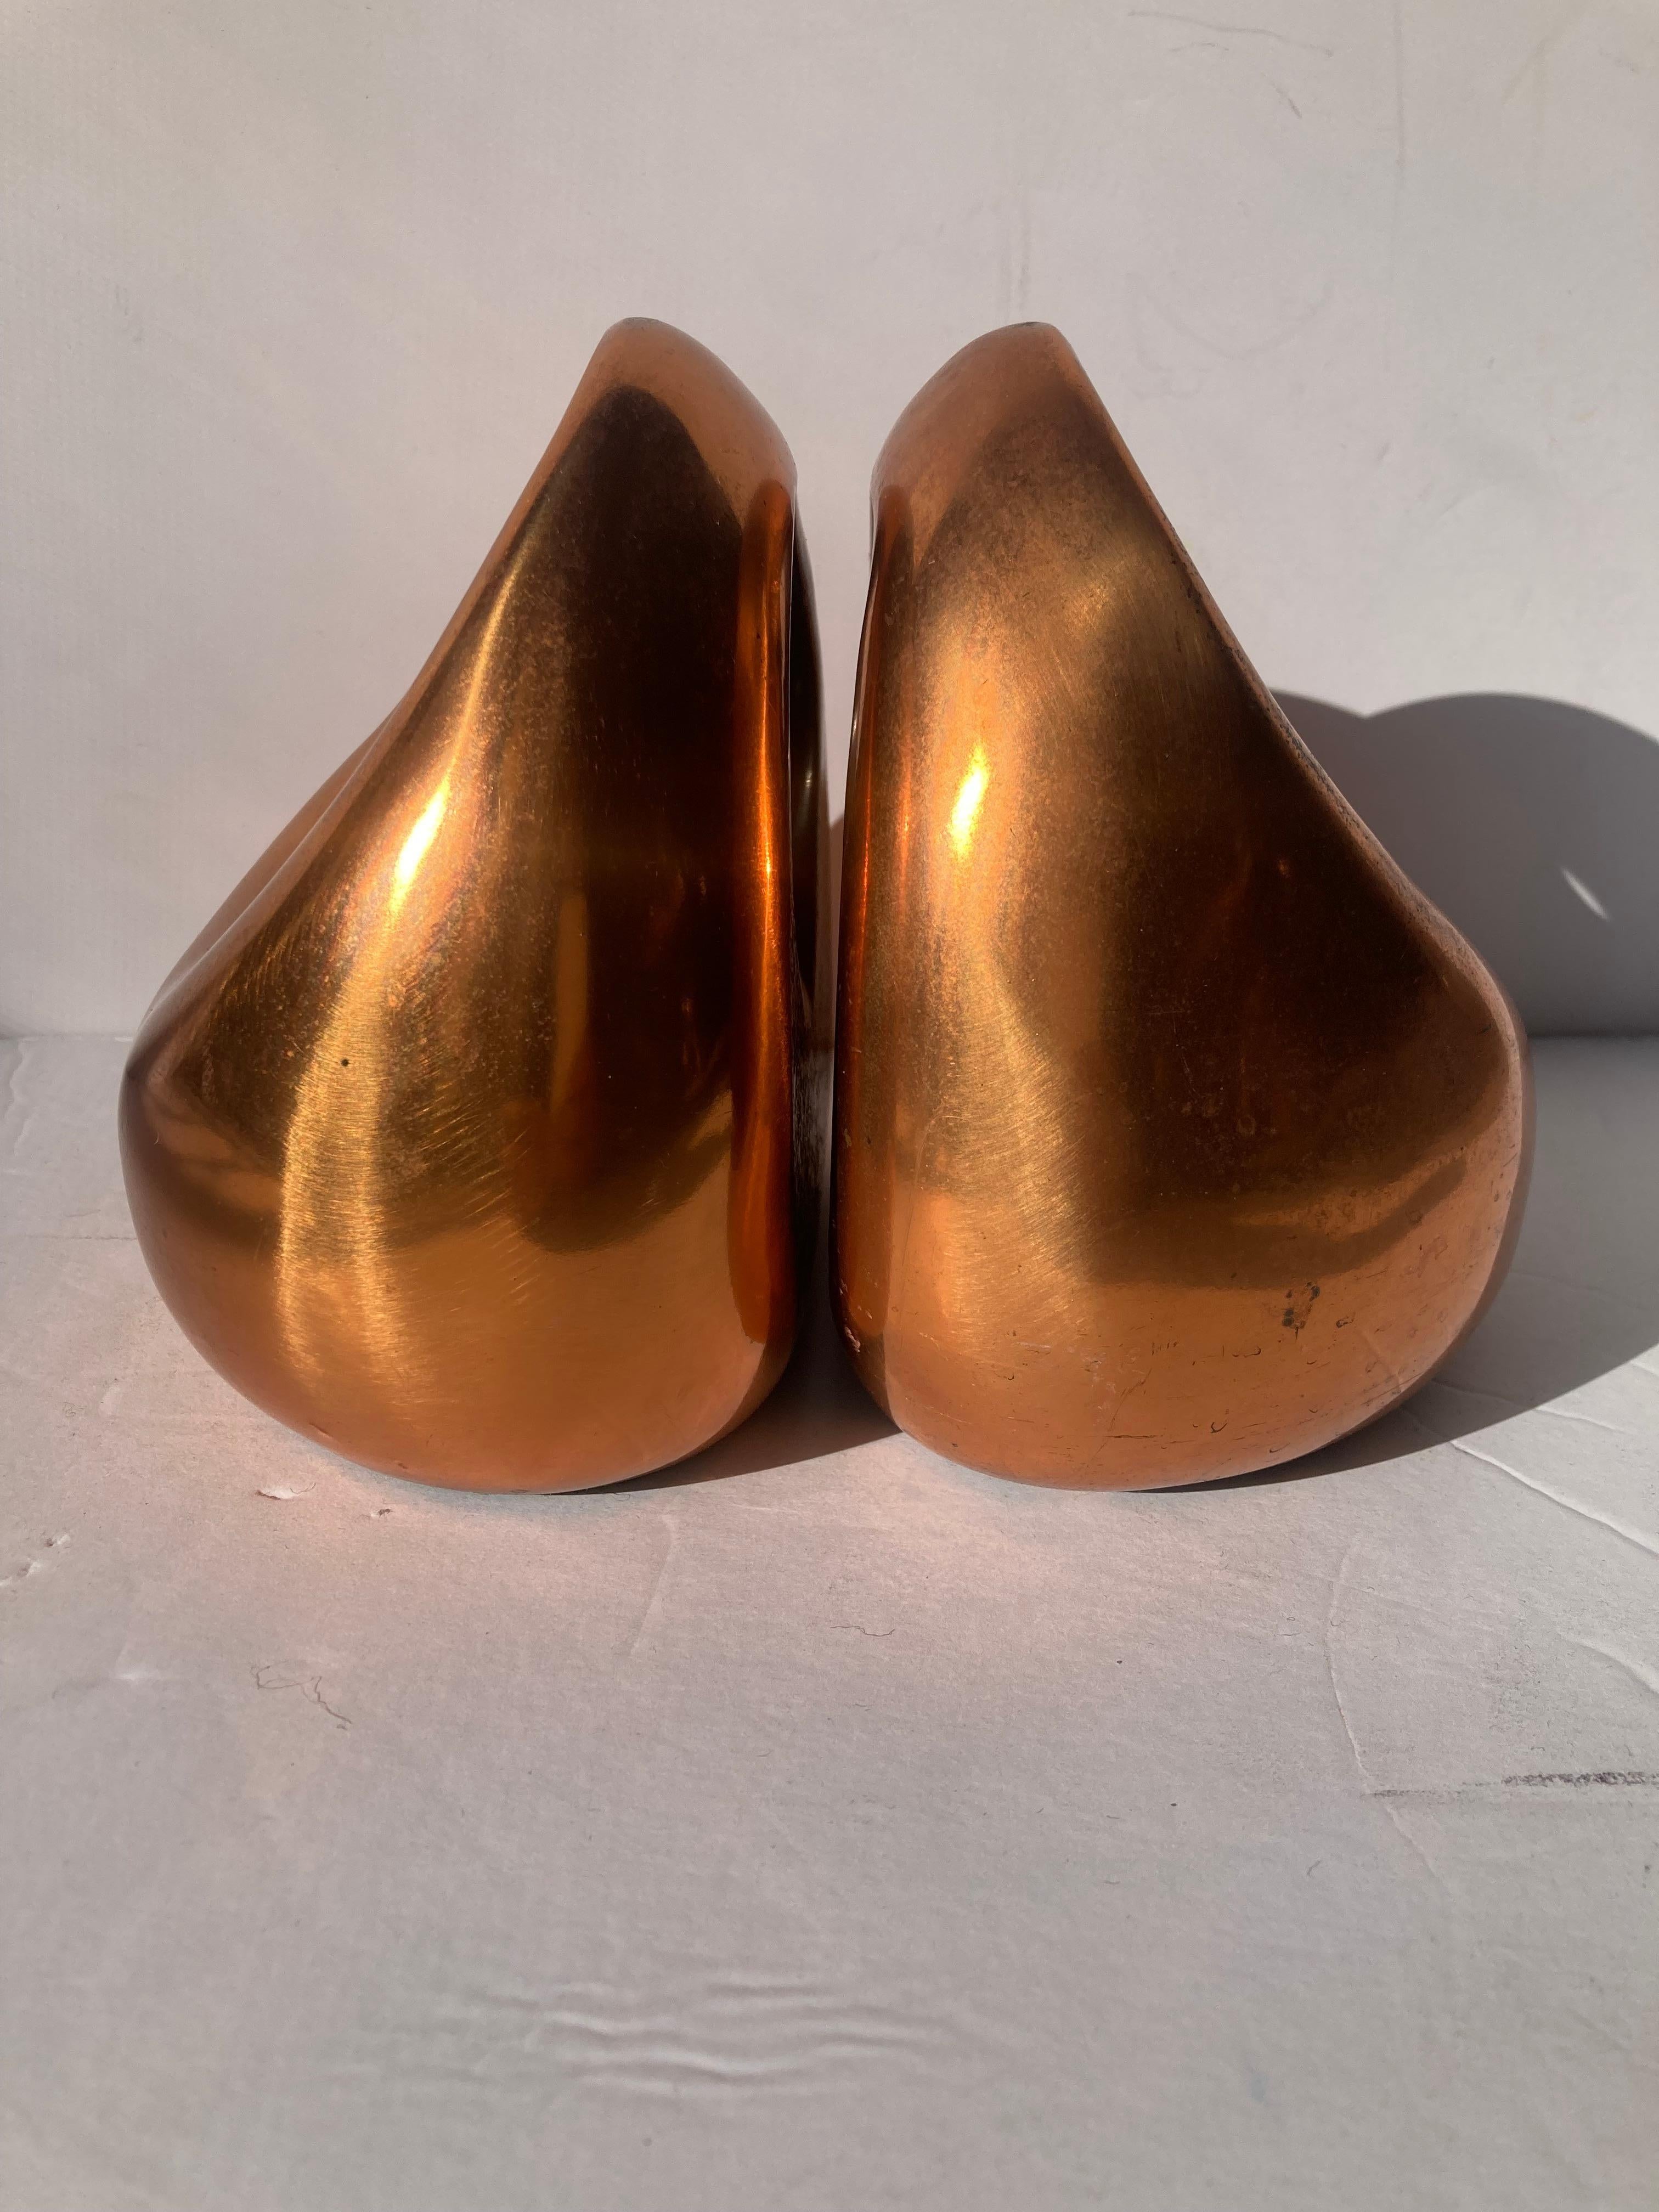 Great modern design in this pair of bookends by the well known Modern designer Ben Seibel.